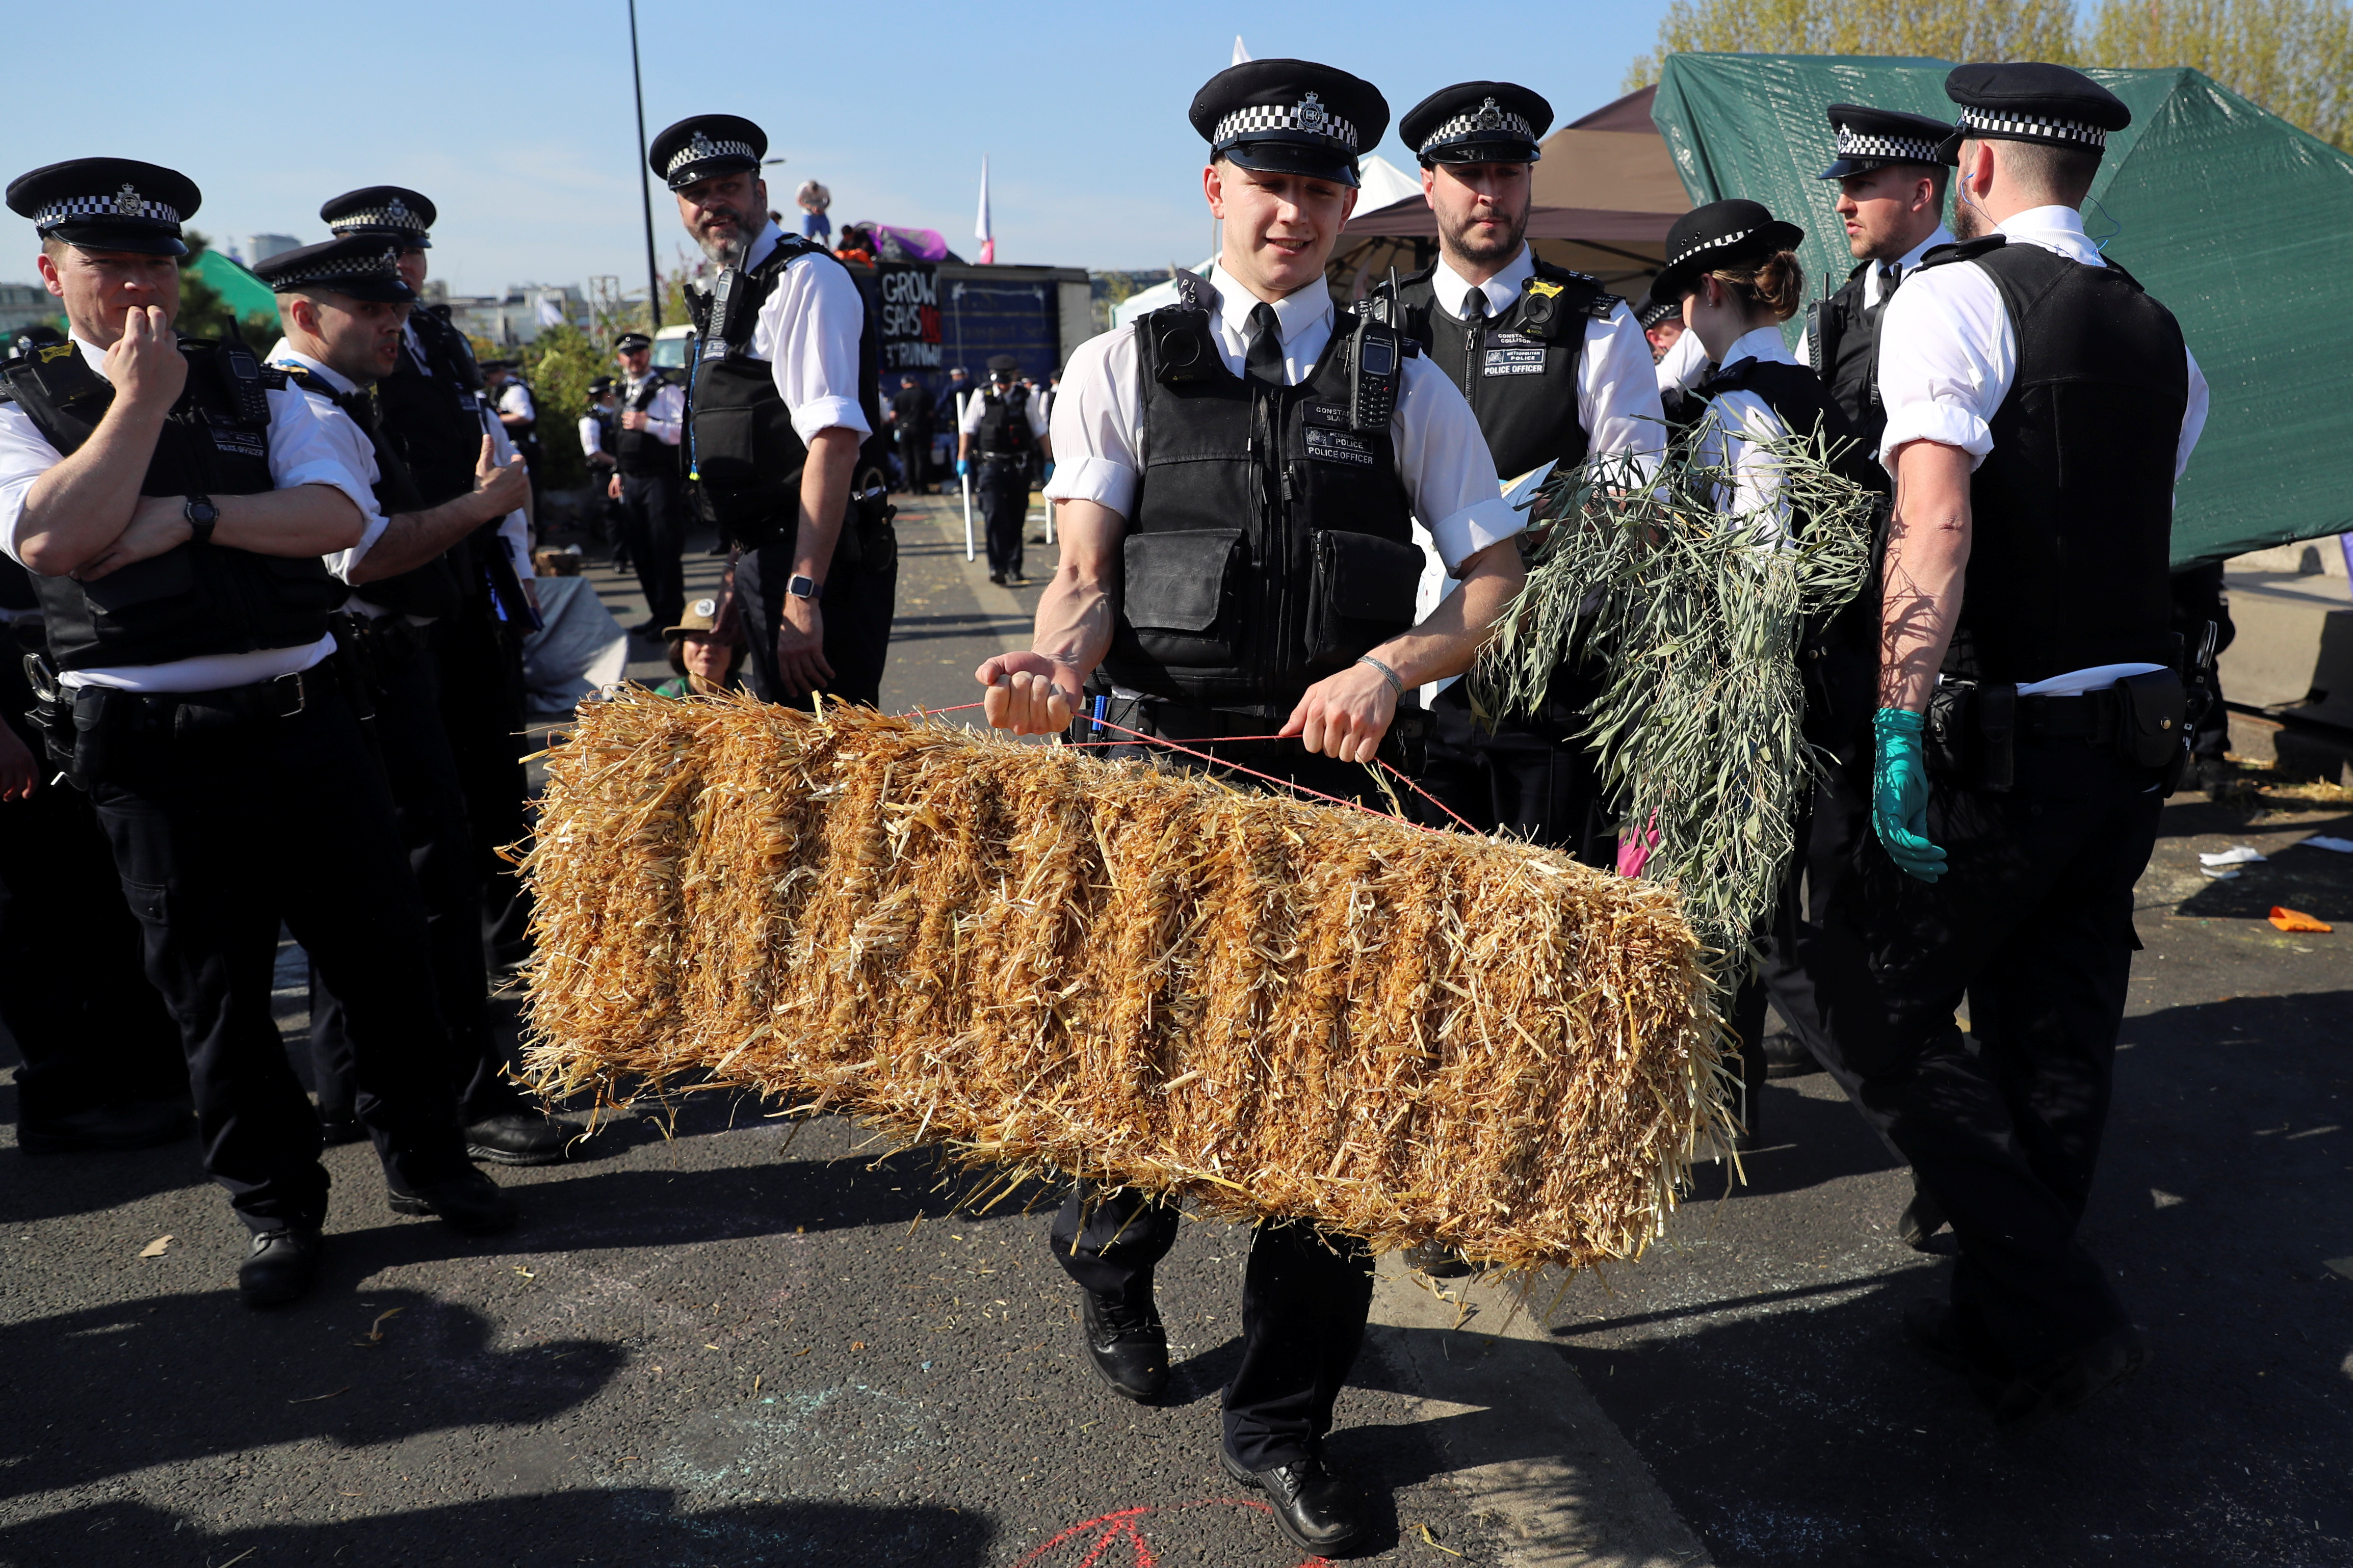 A police officer removes a haystack during the Extinction Rebellion protest on Waterloo Bridge in London, Britain April 20, 2019. REUTERS/Simon Dawson